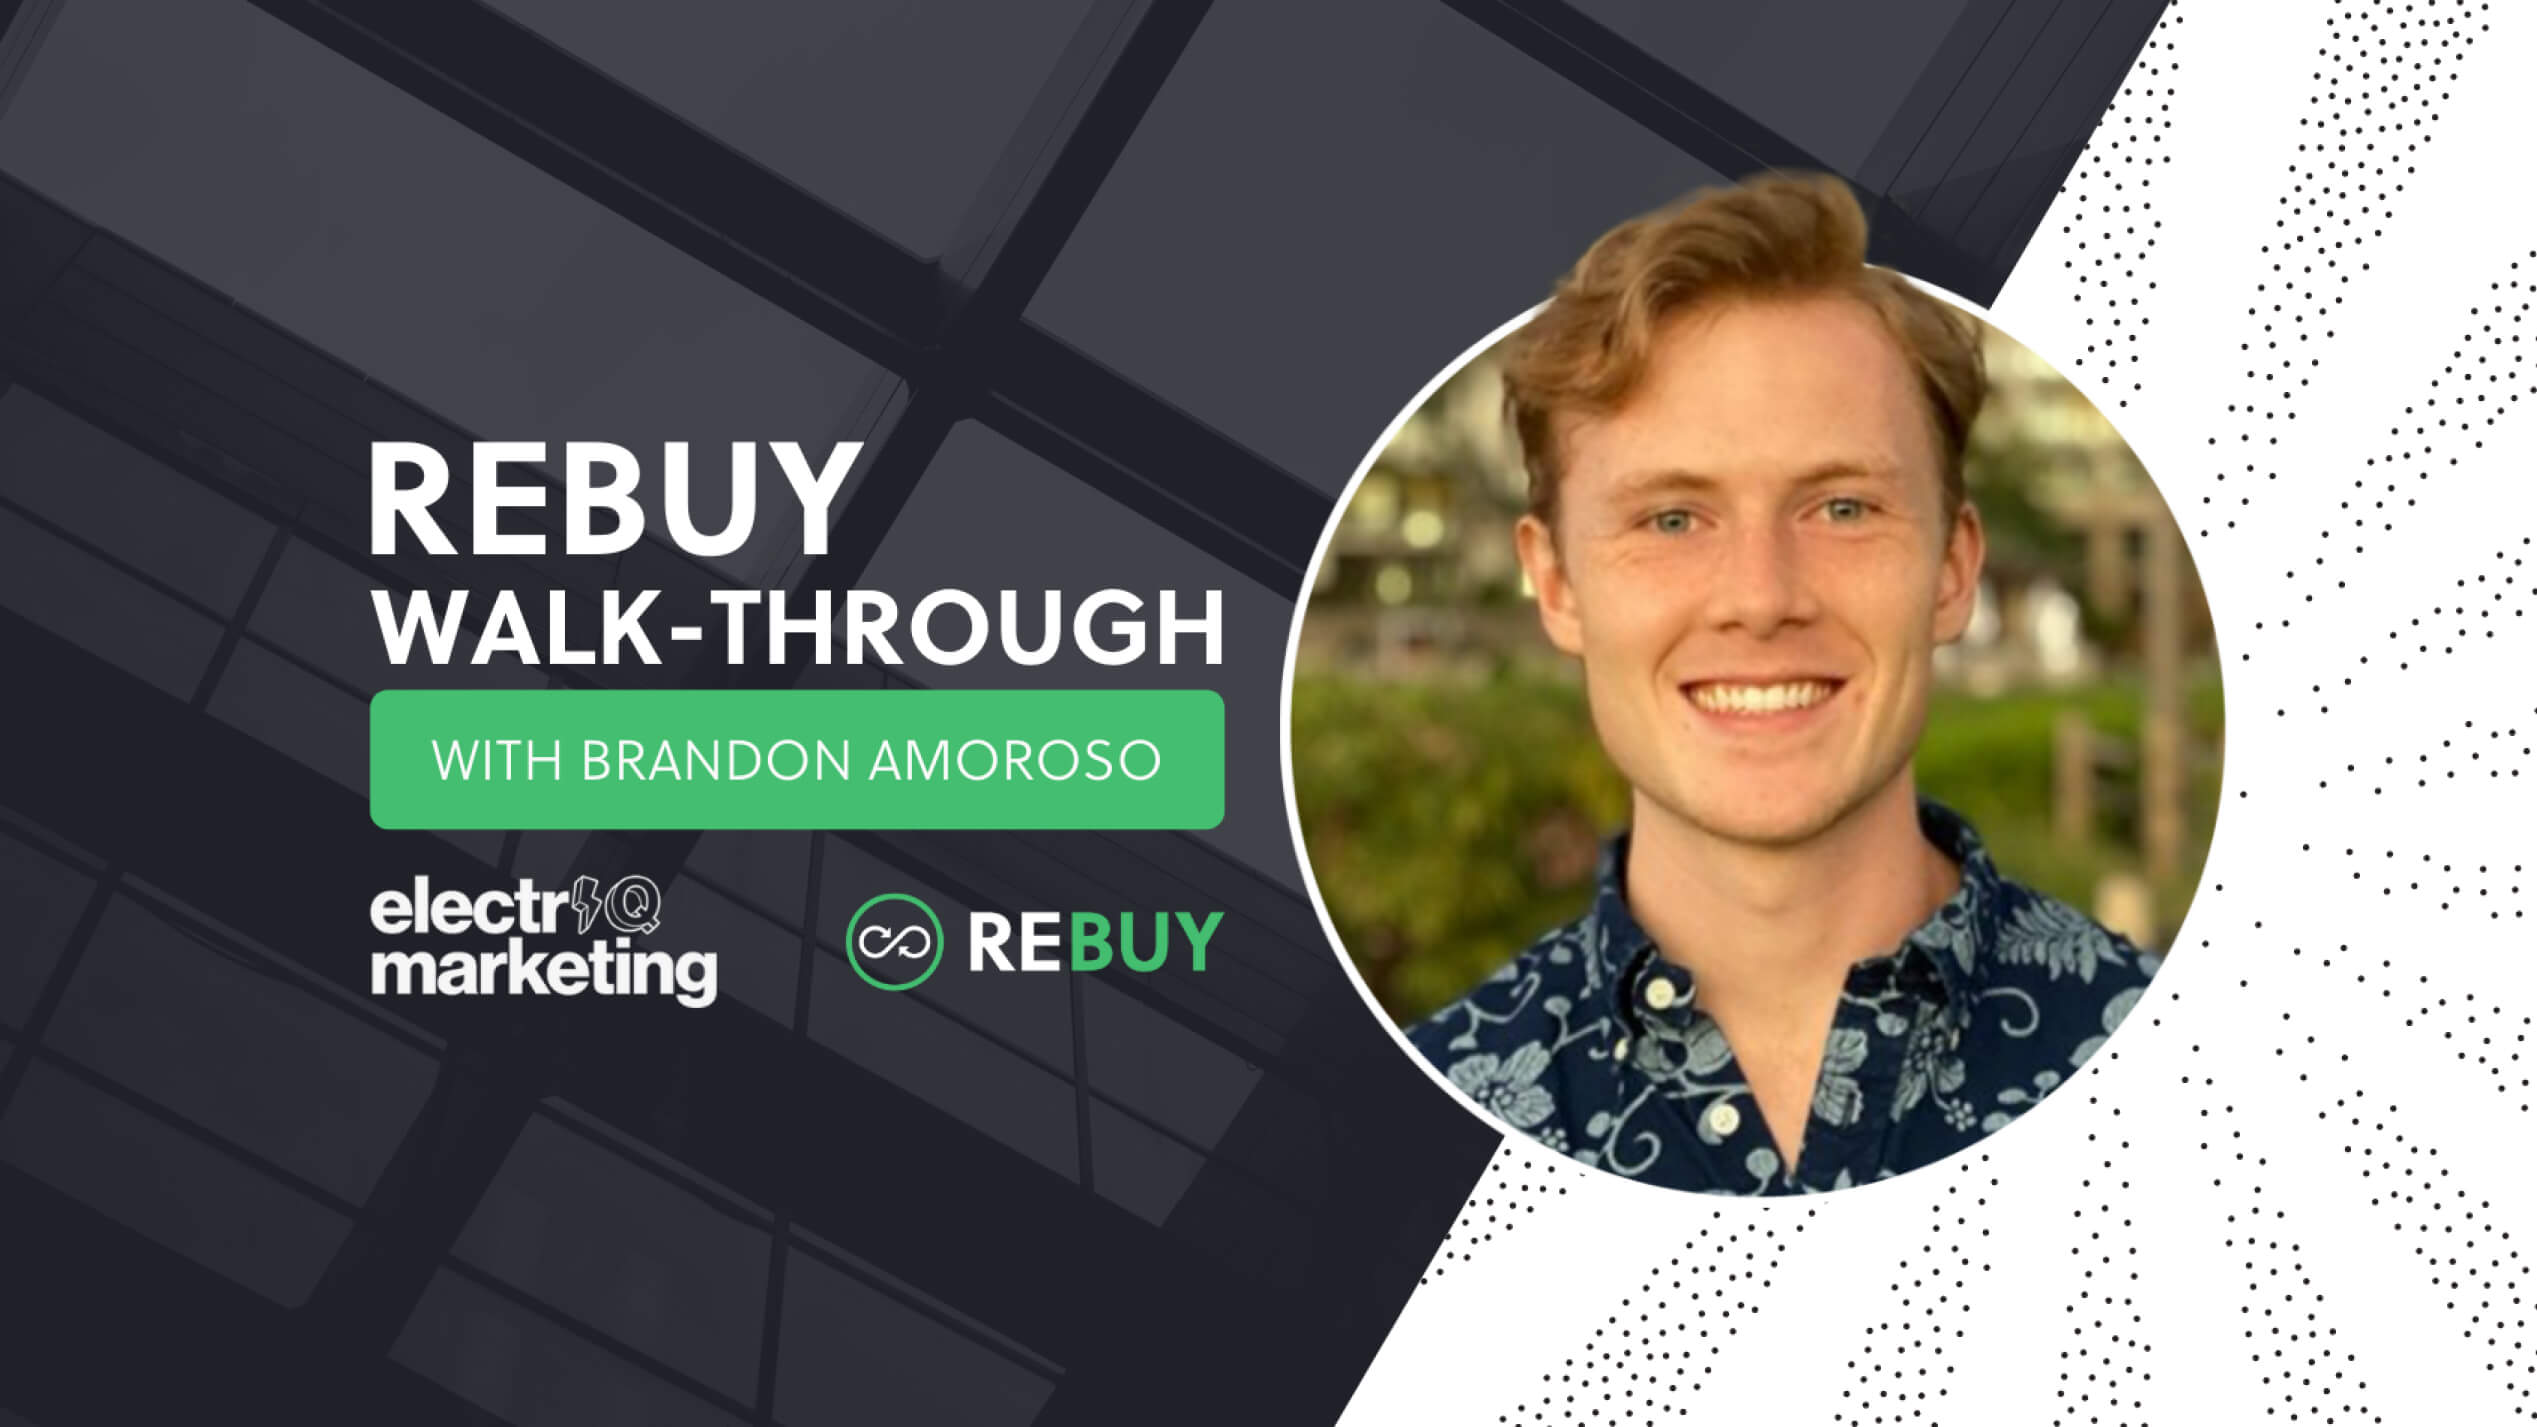 Rebuy Experts: How electrIQ marketing Uses Rebuy to Supercharge AOV, CR, and Retention